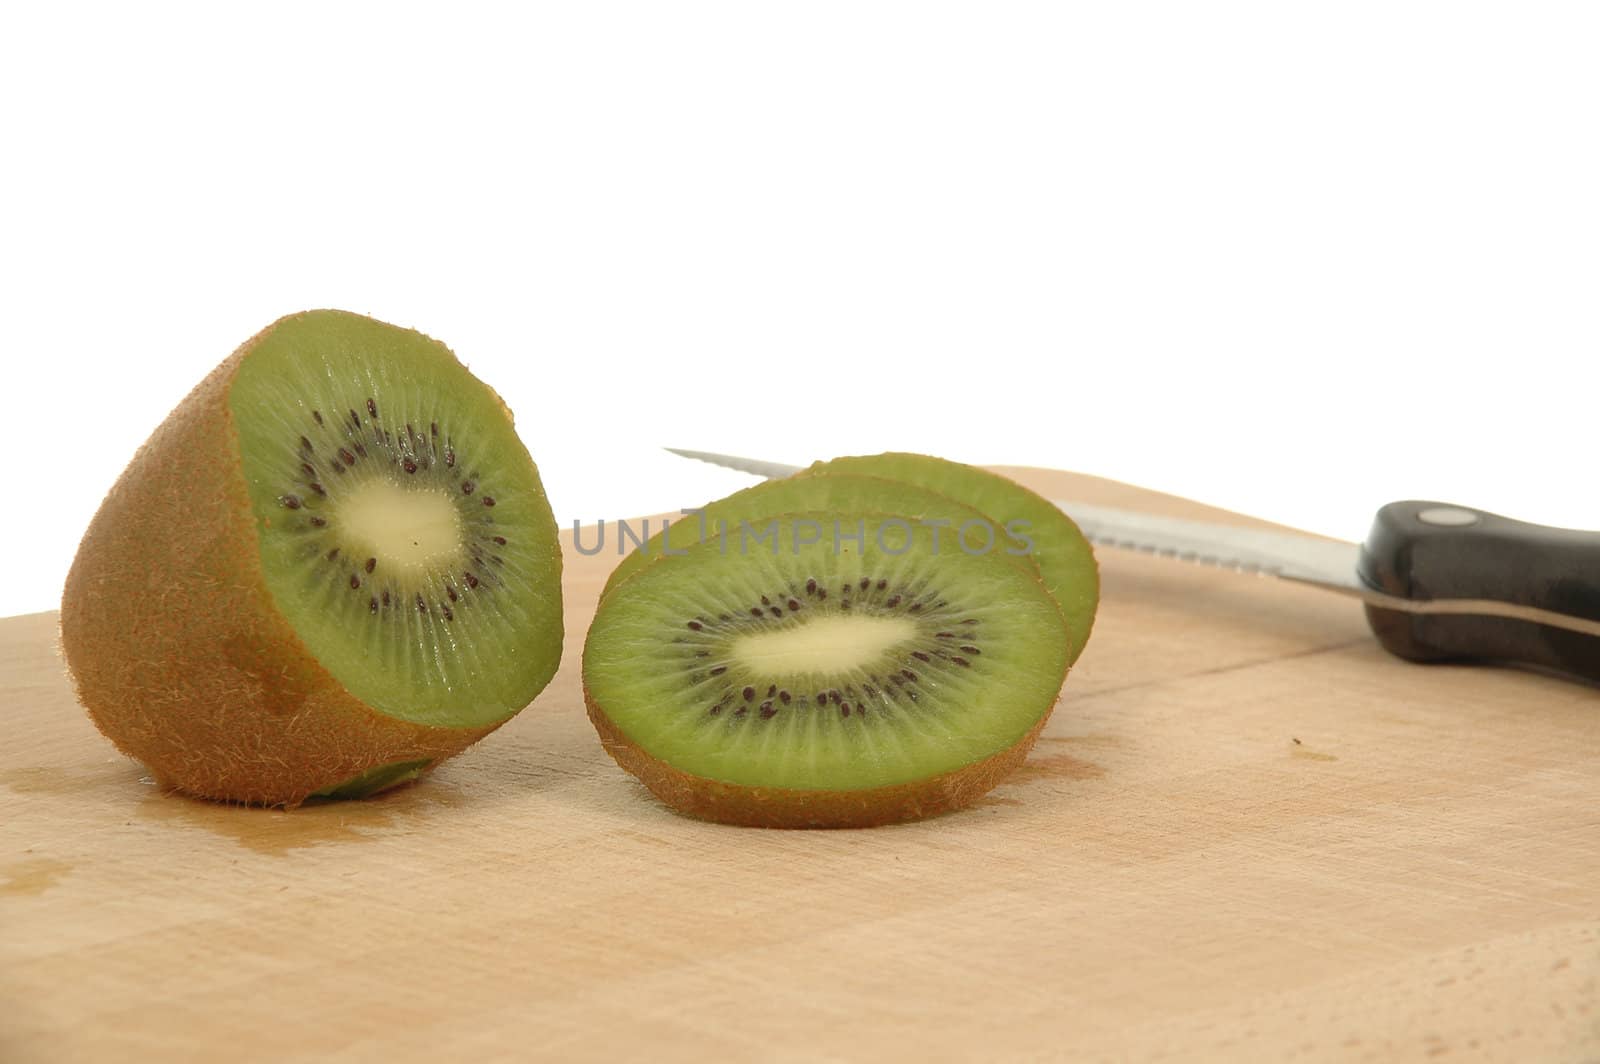 Half kiwi and slices is in focus. With knife and kiwies in the background.